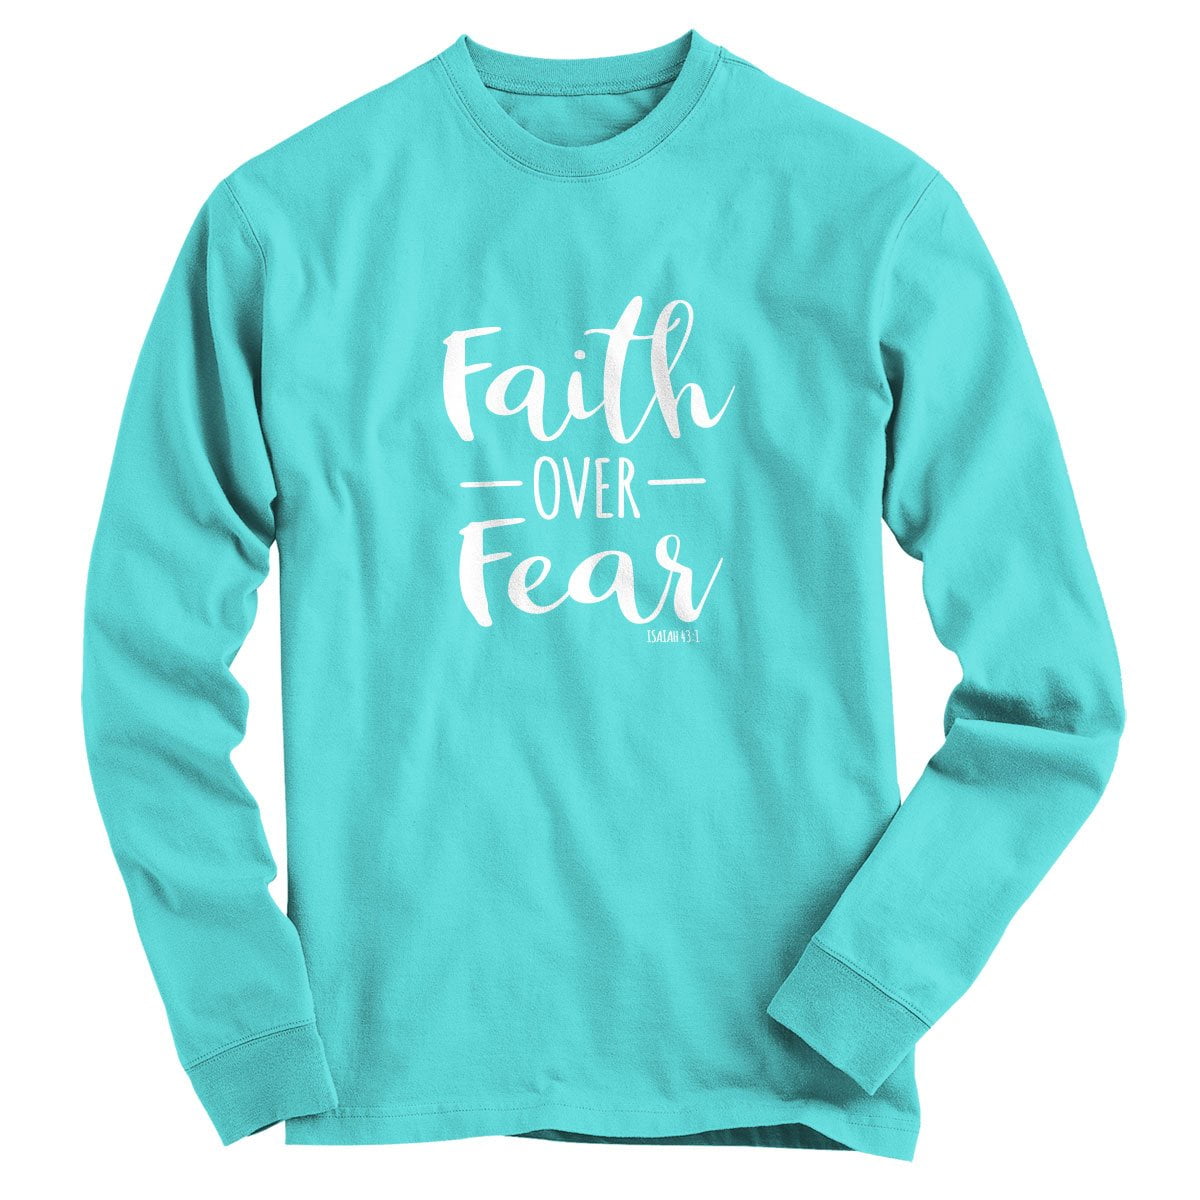 Women's Faith Over Fear Tshirt Leopard Print Color Block Tunic Round Neck Long Sleeve Shirts Striped Blouses Tops